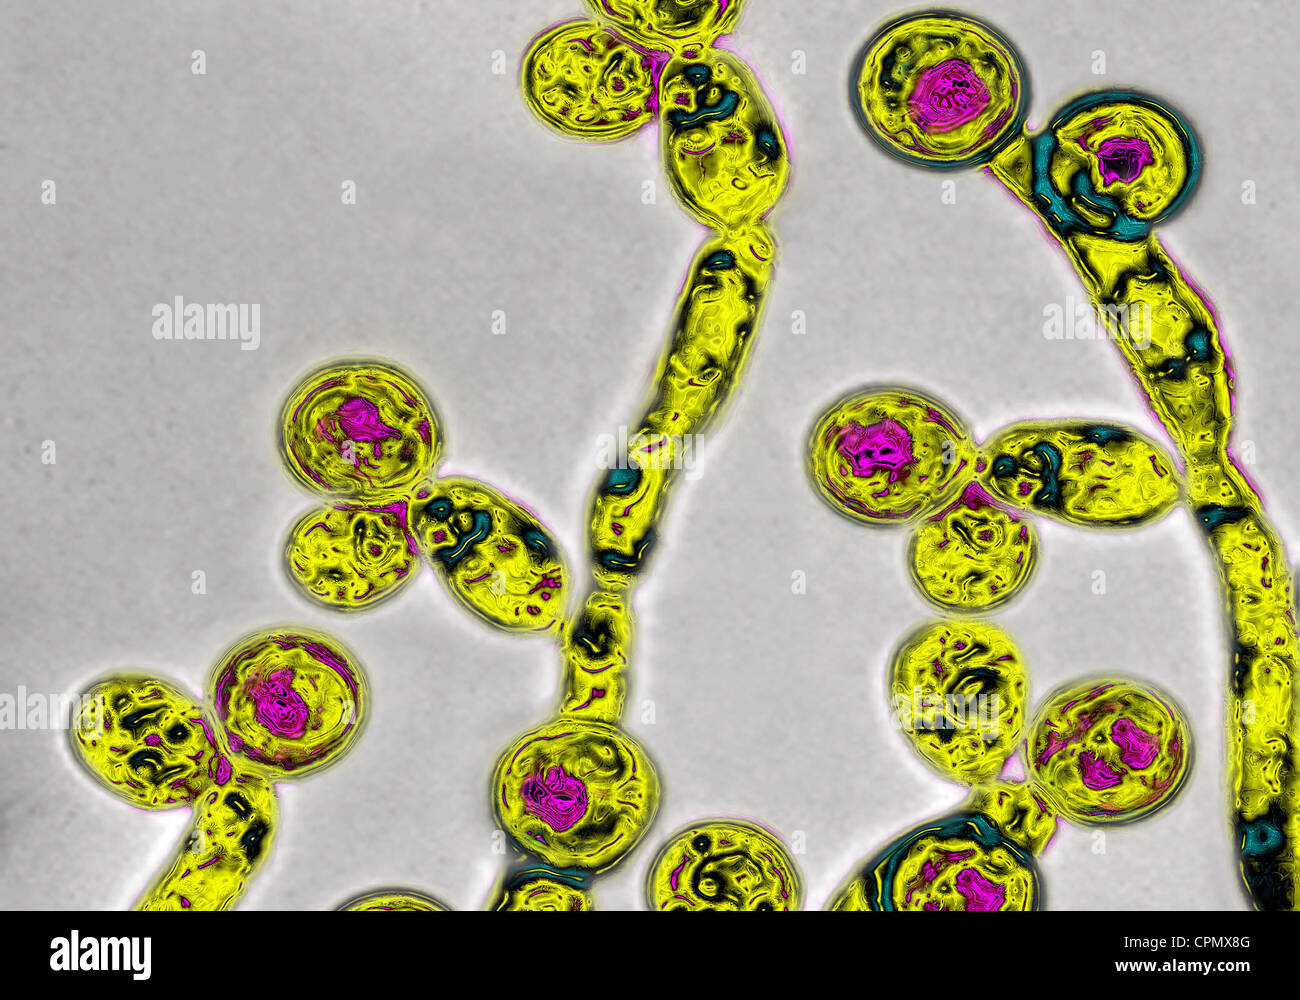 CANDIDA ALBICANS Stock Photo